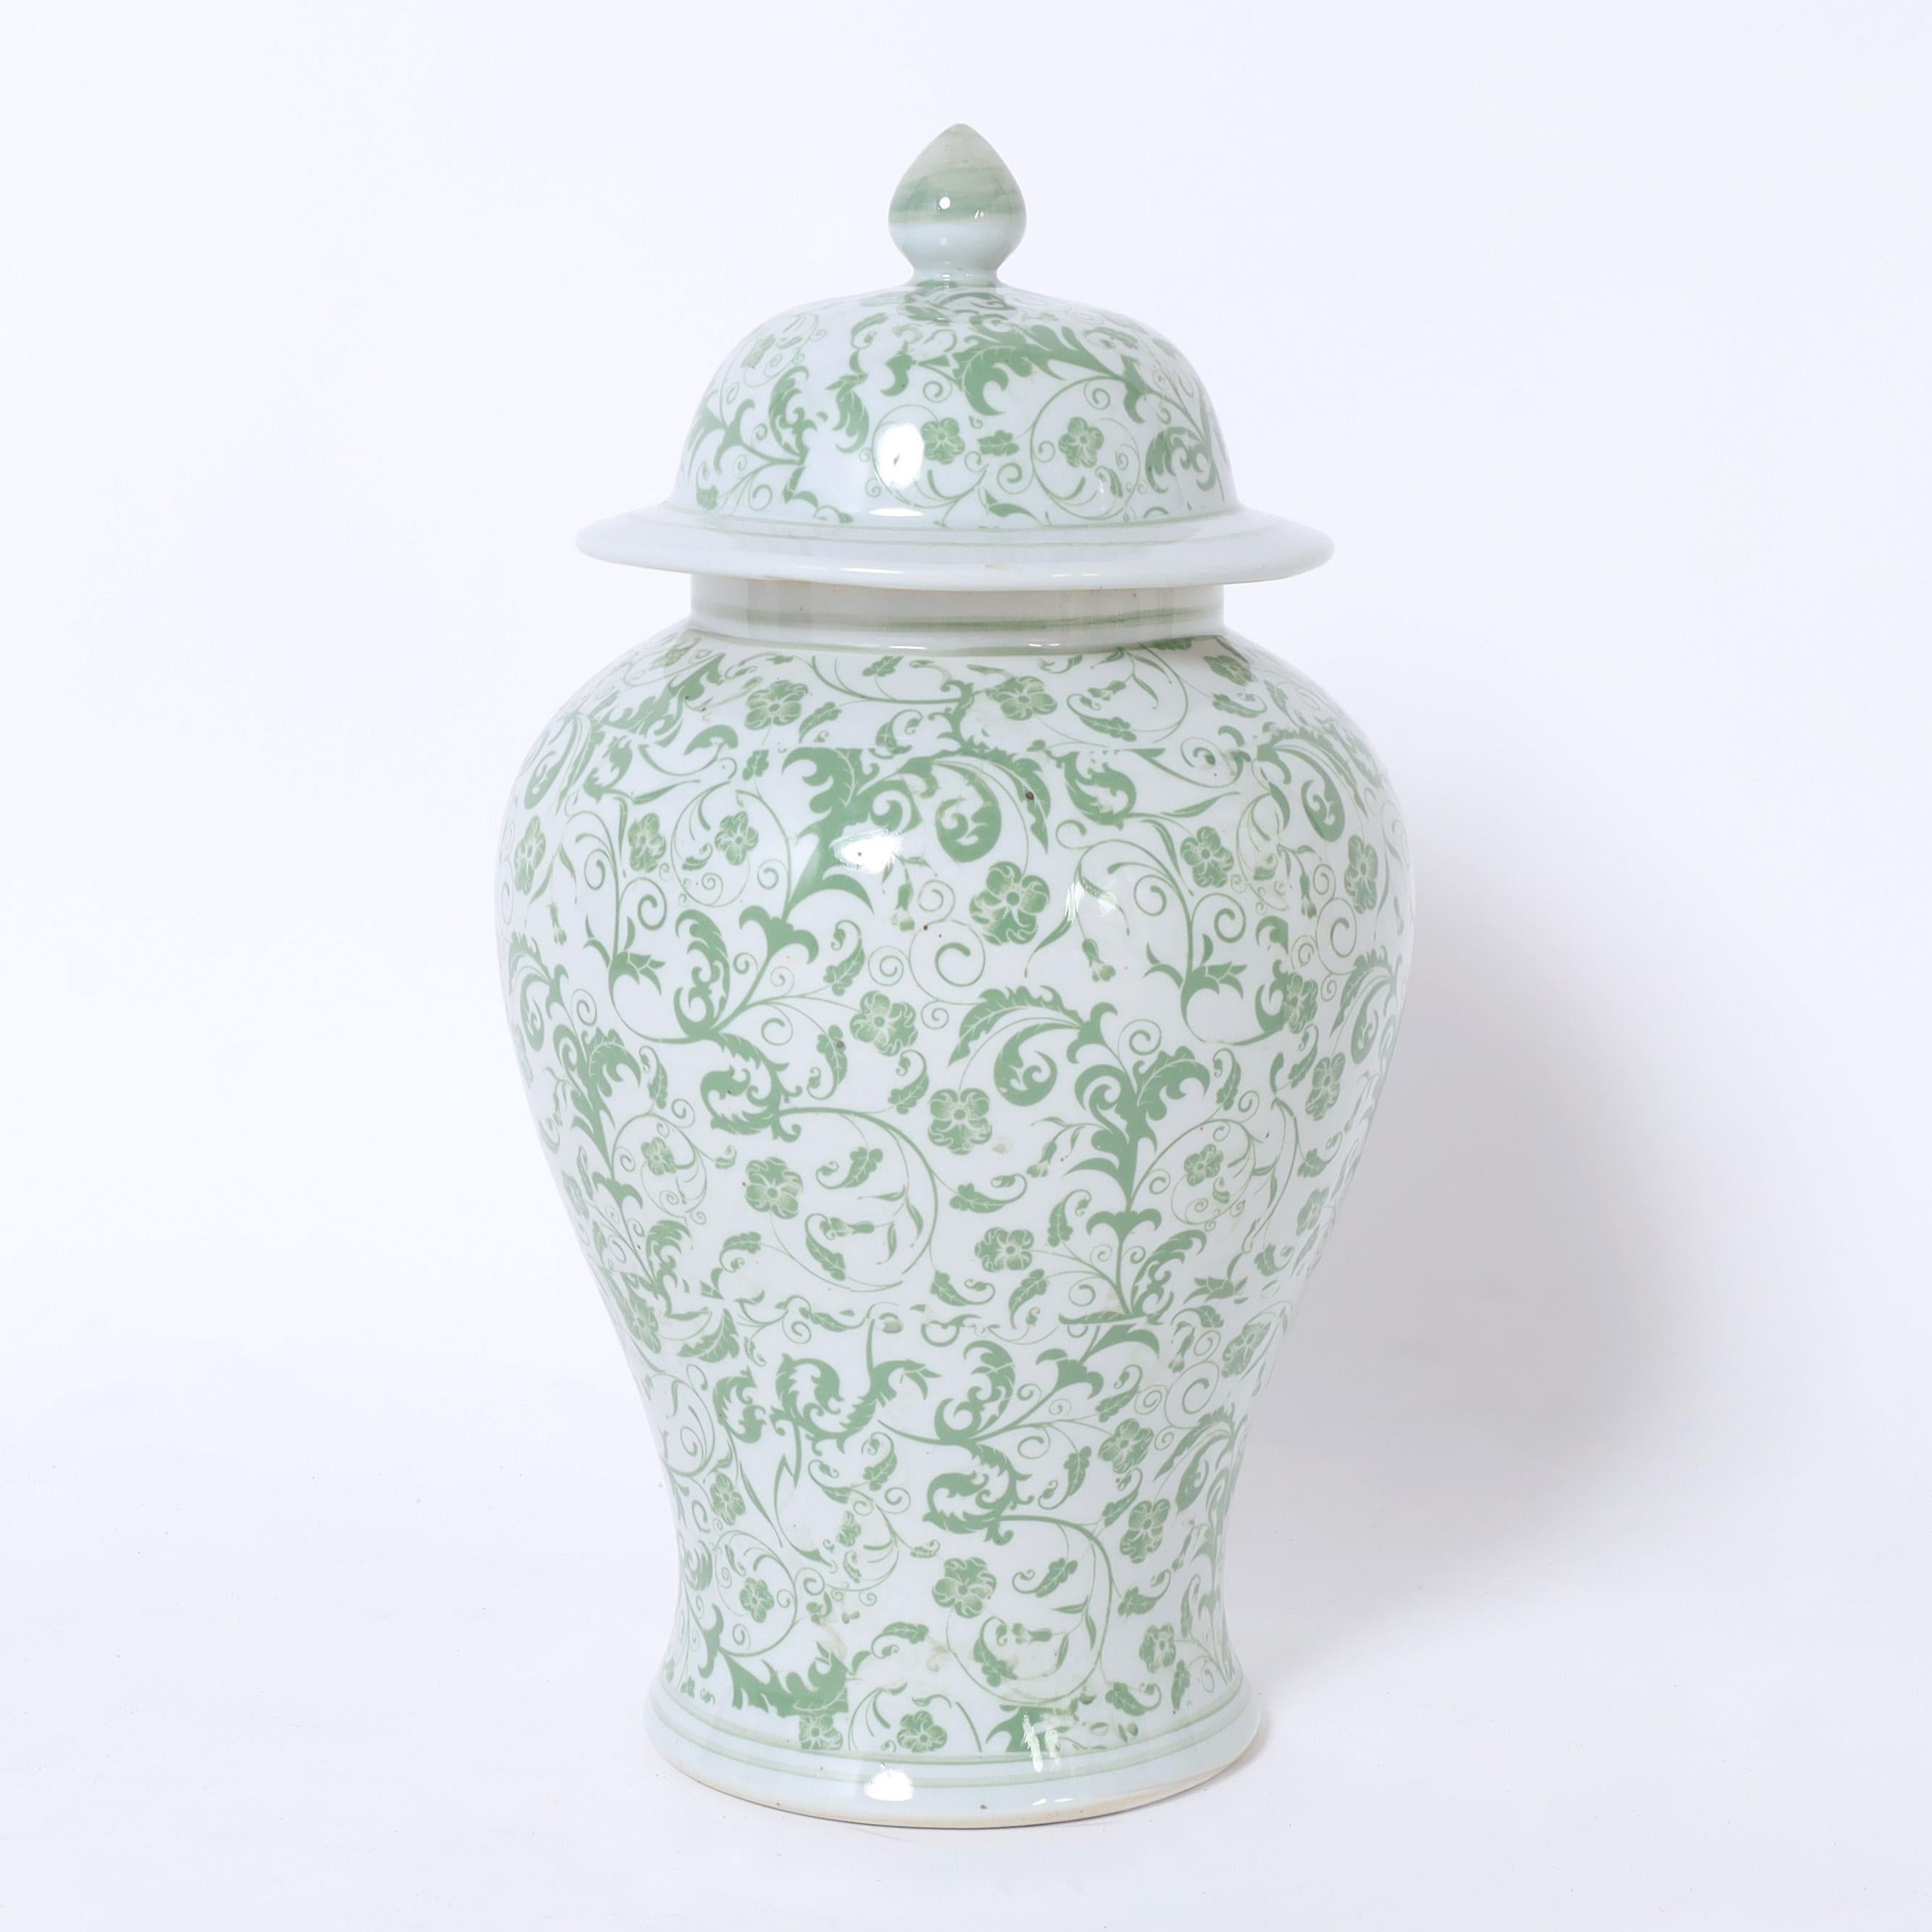 Glazed Pair of Chinese Green and White Porcelain Lidded Jars